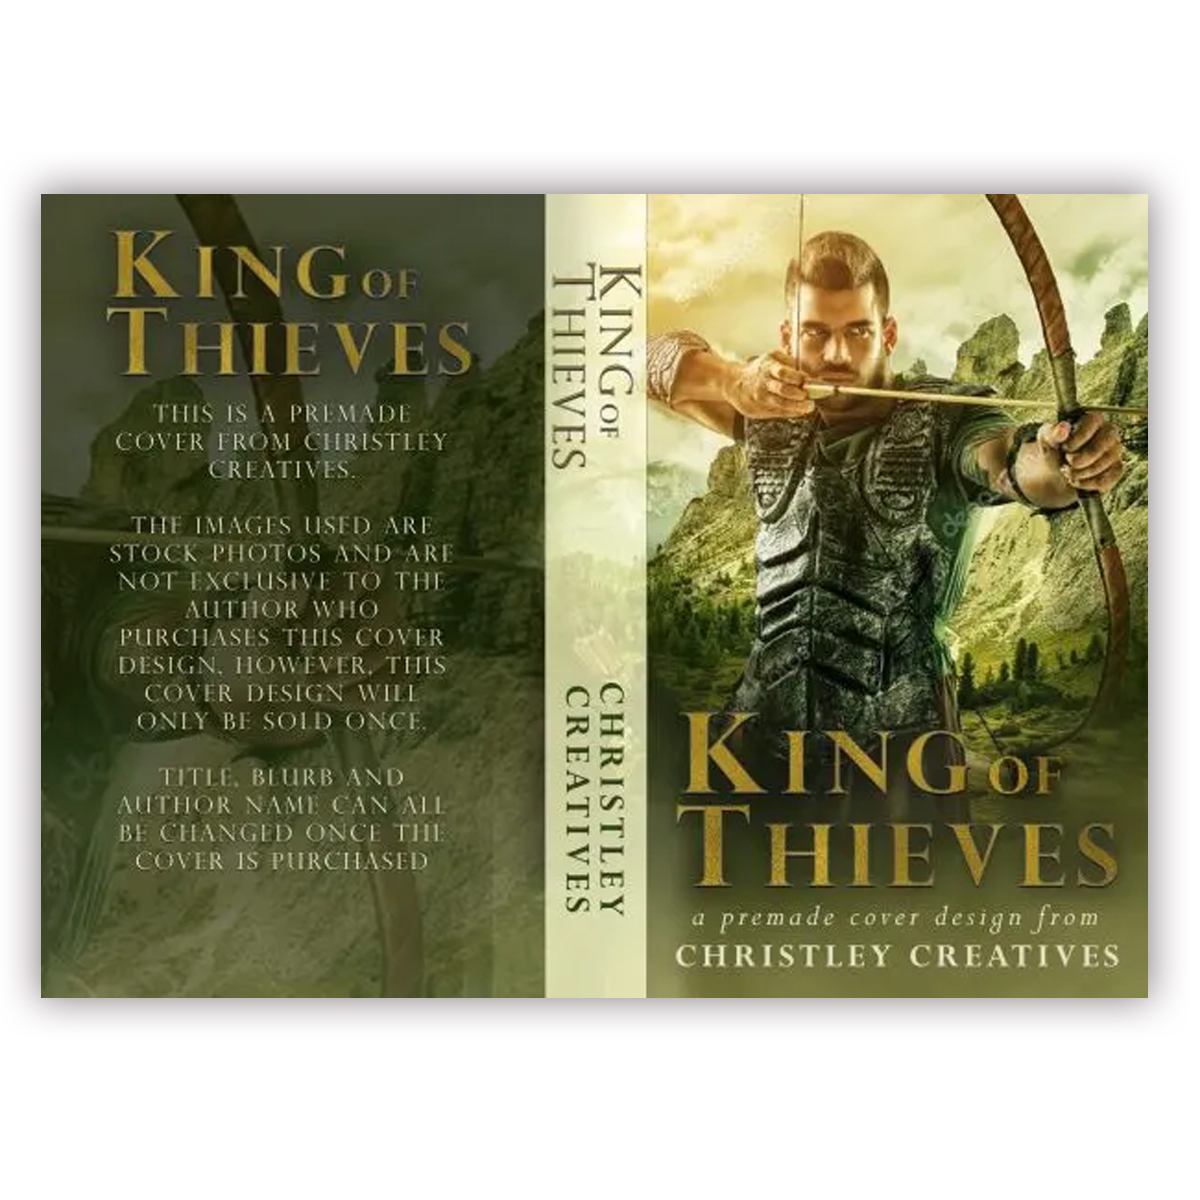 King of Thieves - Premade Contemporary Romance Book Cover from Christley Creatives